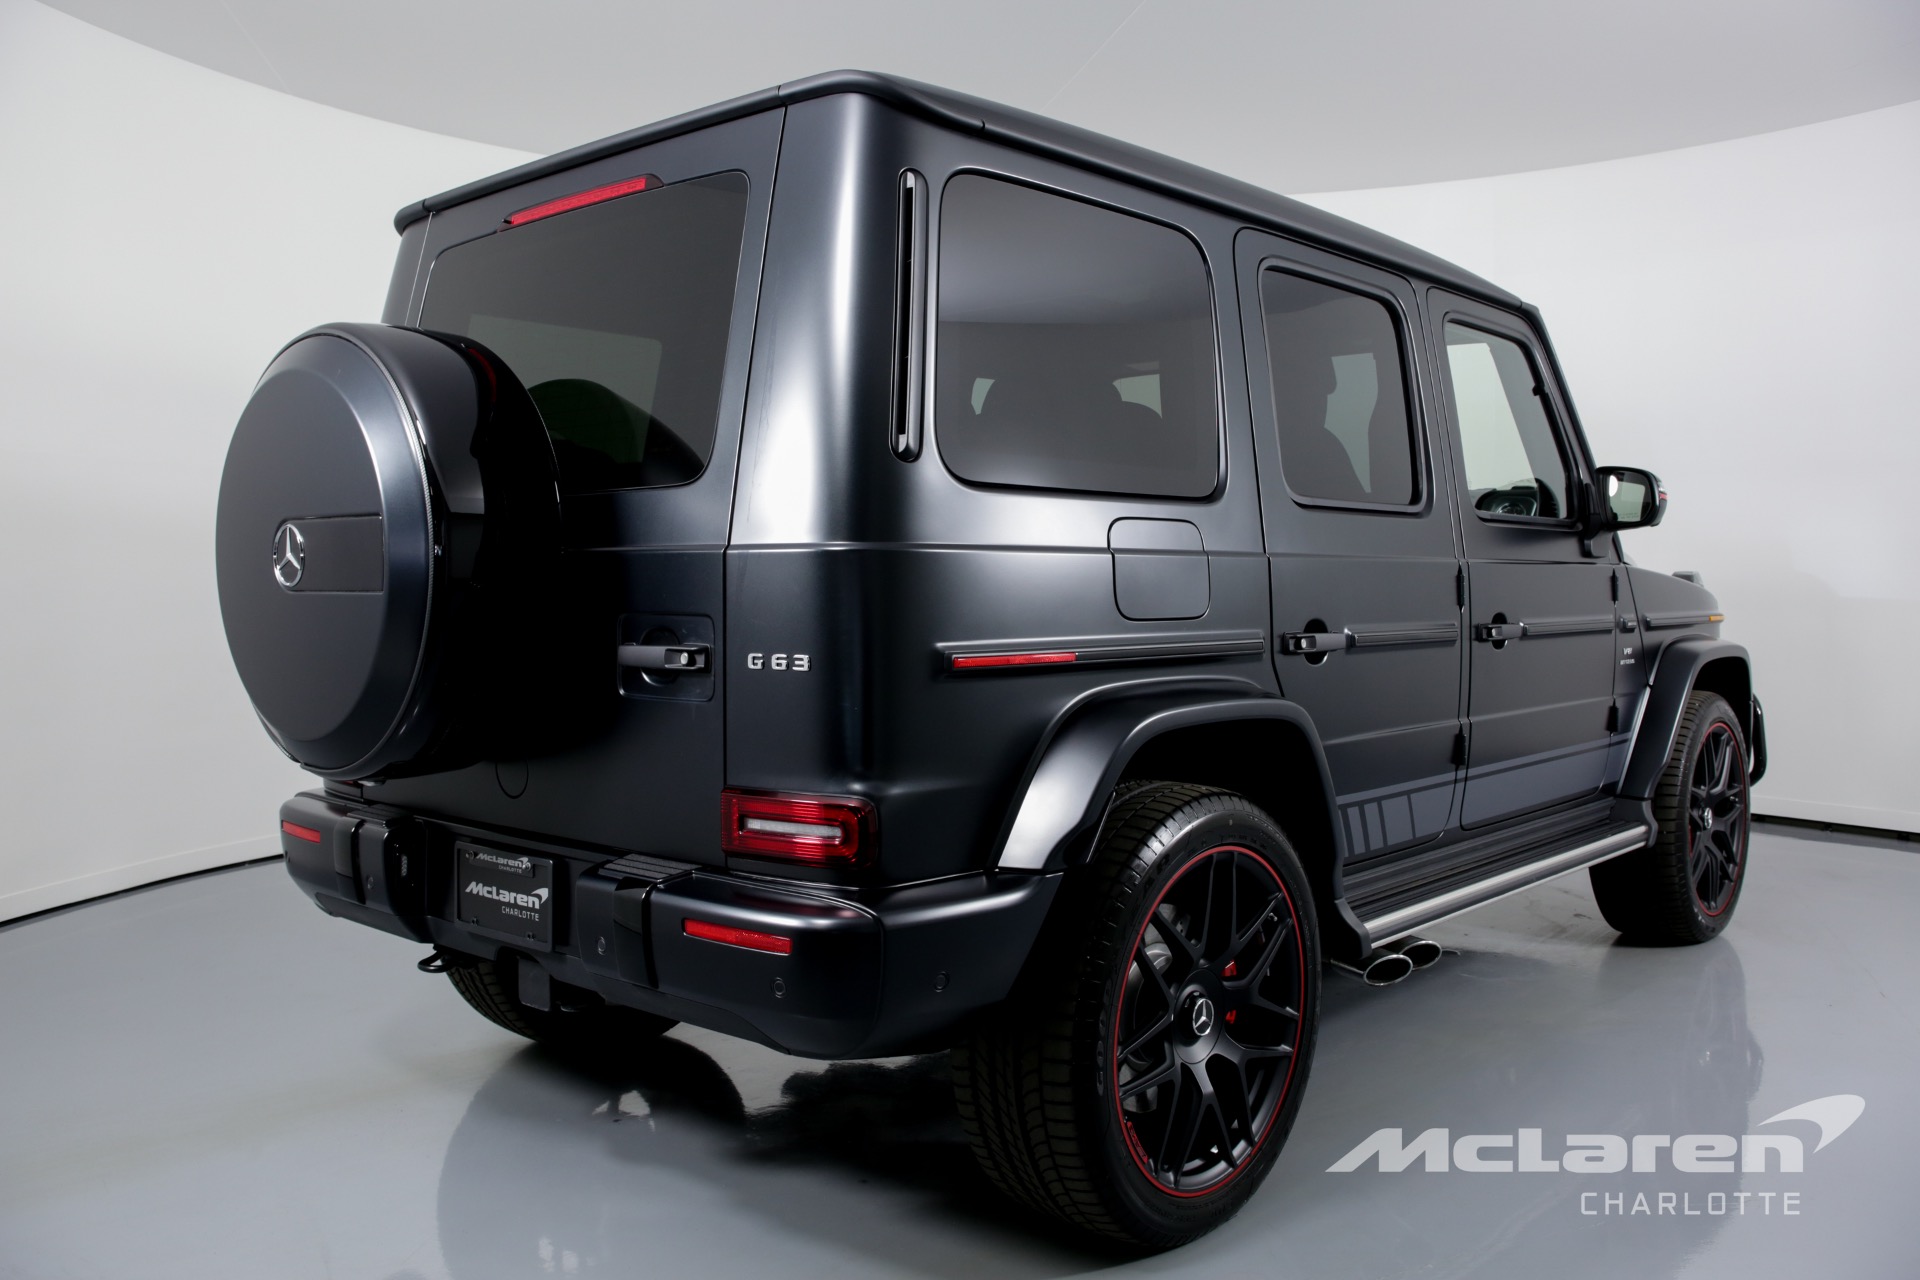 Used 2019 Mercedes Benz G Class Amg G 63 For Sale 249 996